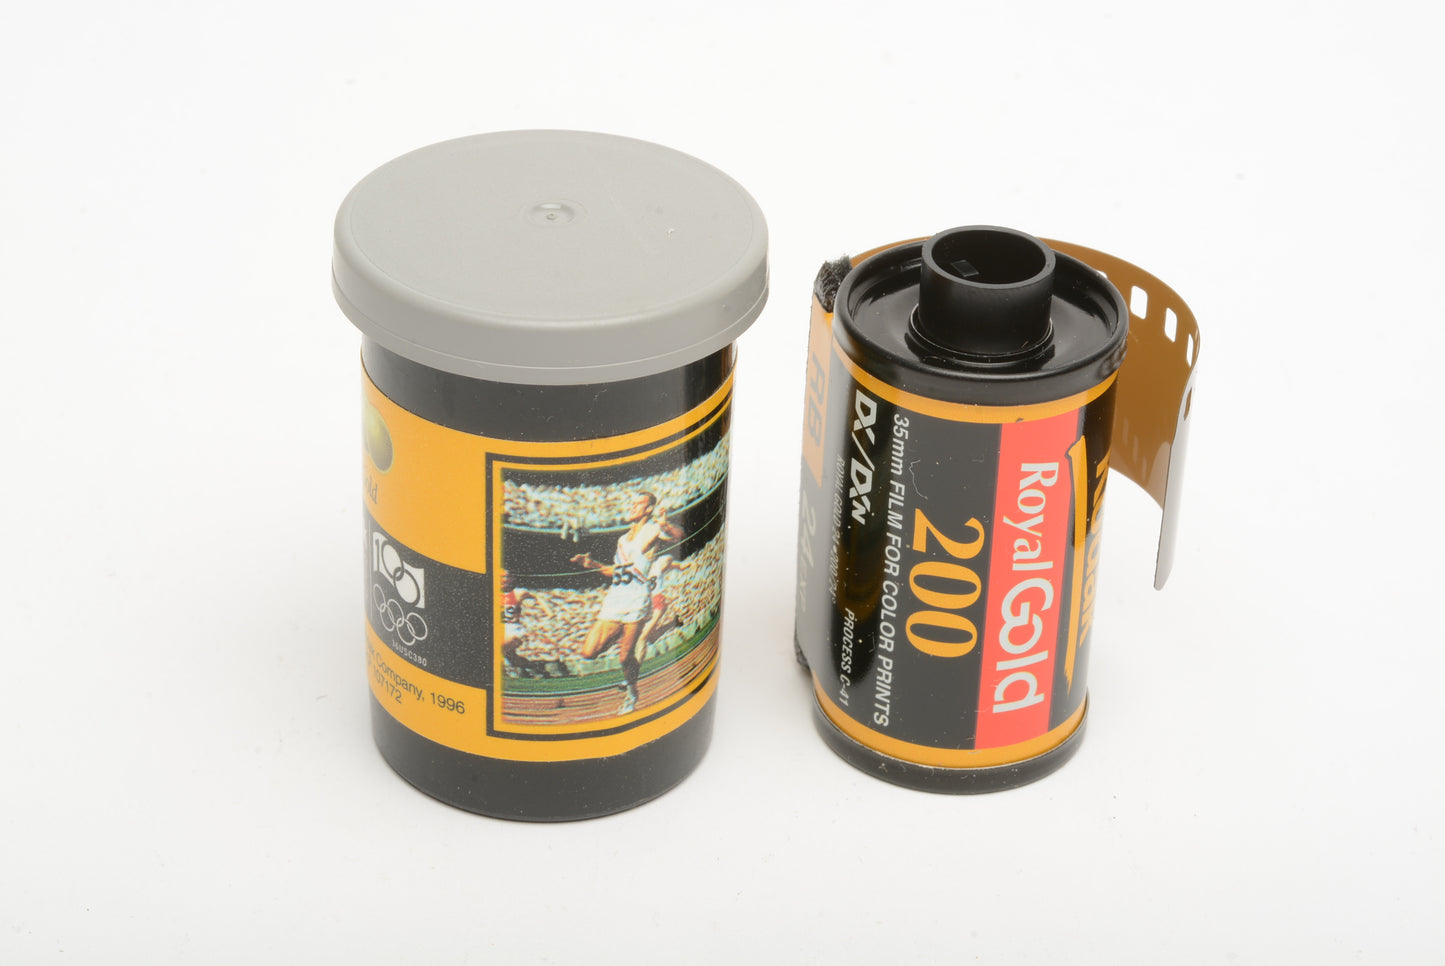 1X Roll of Kodak Royal Gold RB 135-24 film in commemorative plastic can of 1956 Olympics